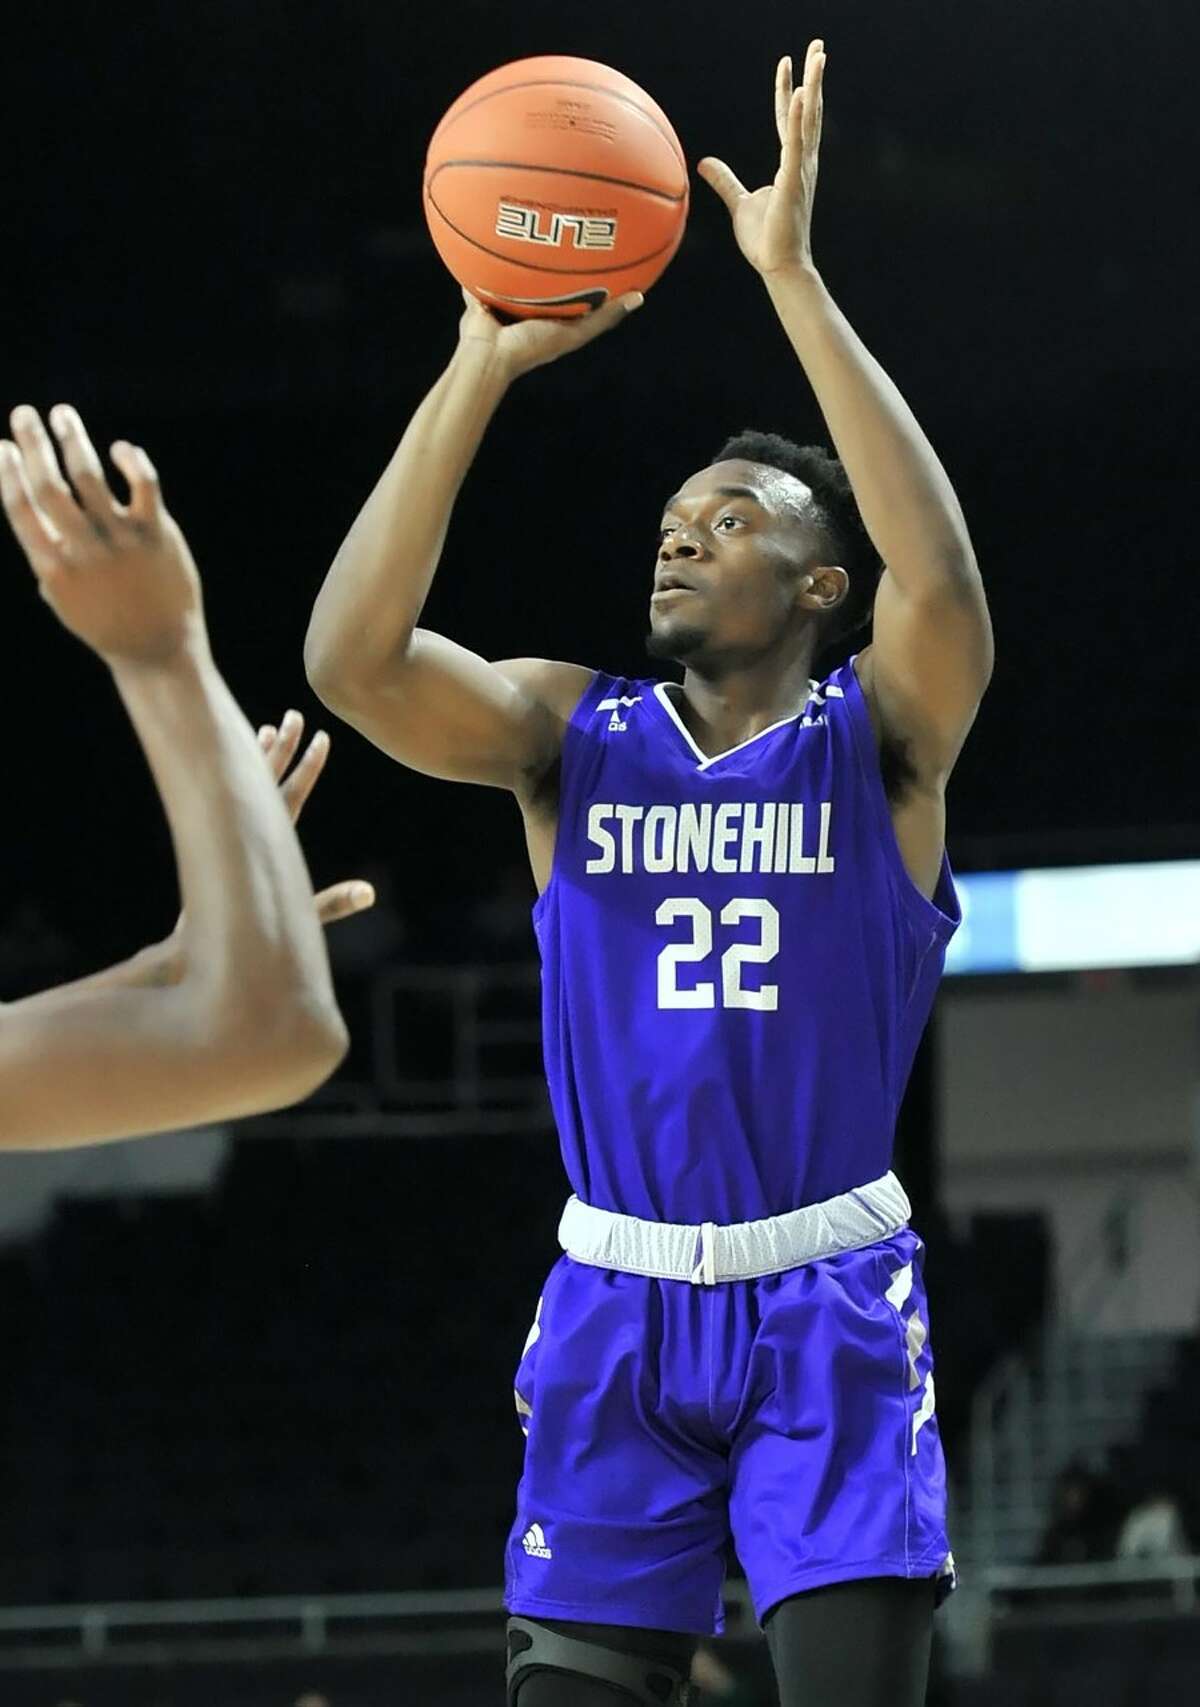 Waterbury's Shamir Johnson should see playing time for Stonehill College on Monday night when the SkyHawks begin their season against UConn in Hartford.